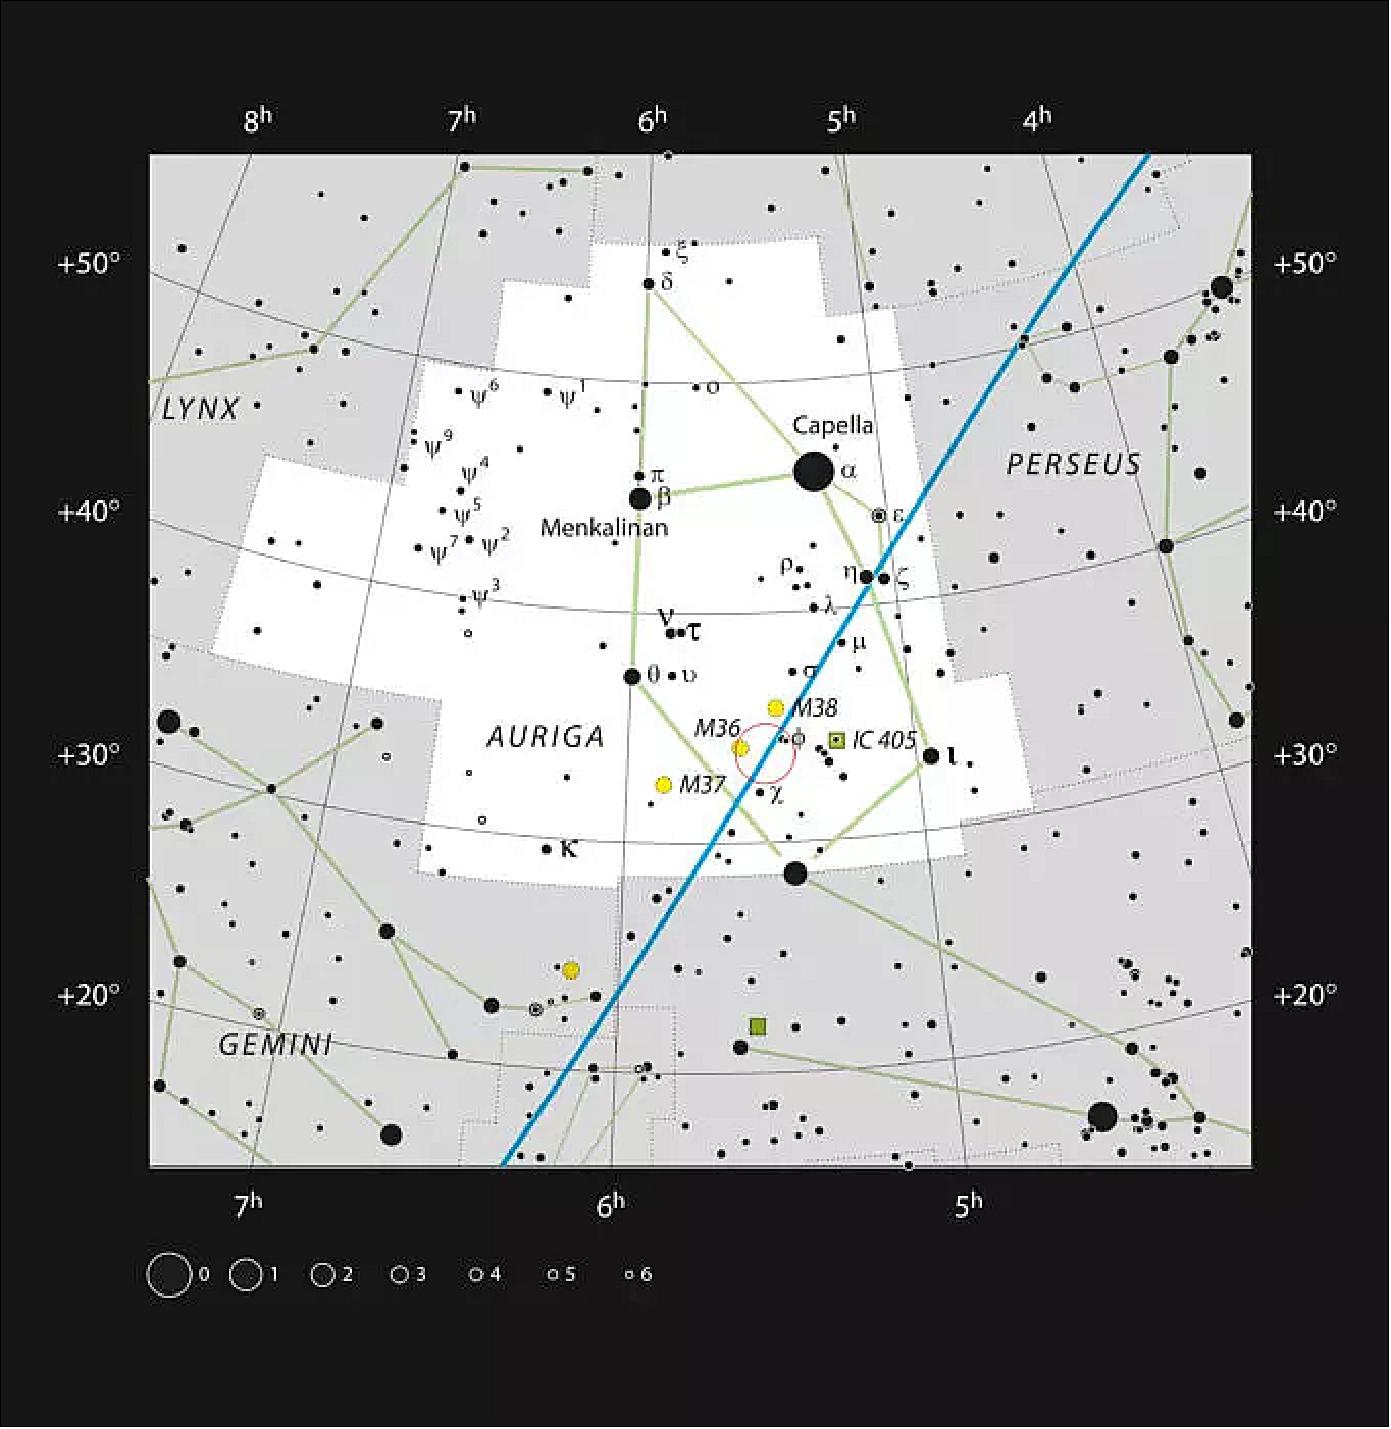 Figure 77: This chart shows the location of the star-forming region AFGL 5142, recently observed with ALMA, in the constellation of Auriga. The map shows most of the stars visible to the unaided eye under good conditions, and AFGL 5142 itself is highlighted with a red circle on the image (image credit: ESO, IAU and Sky & Telescope)